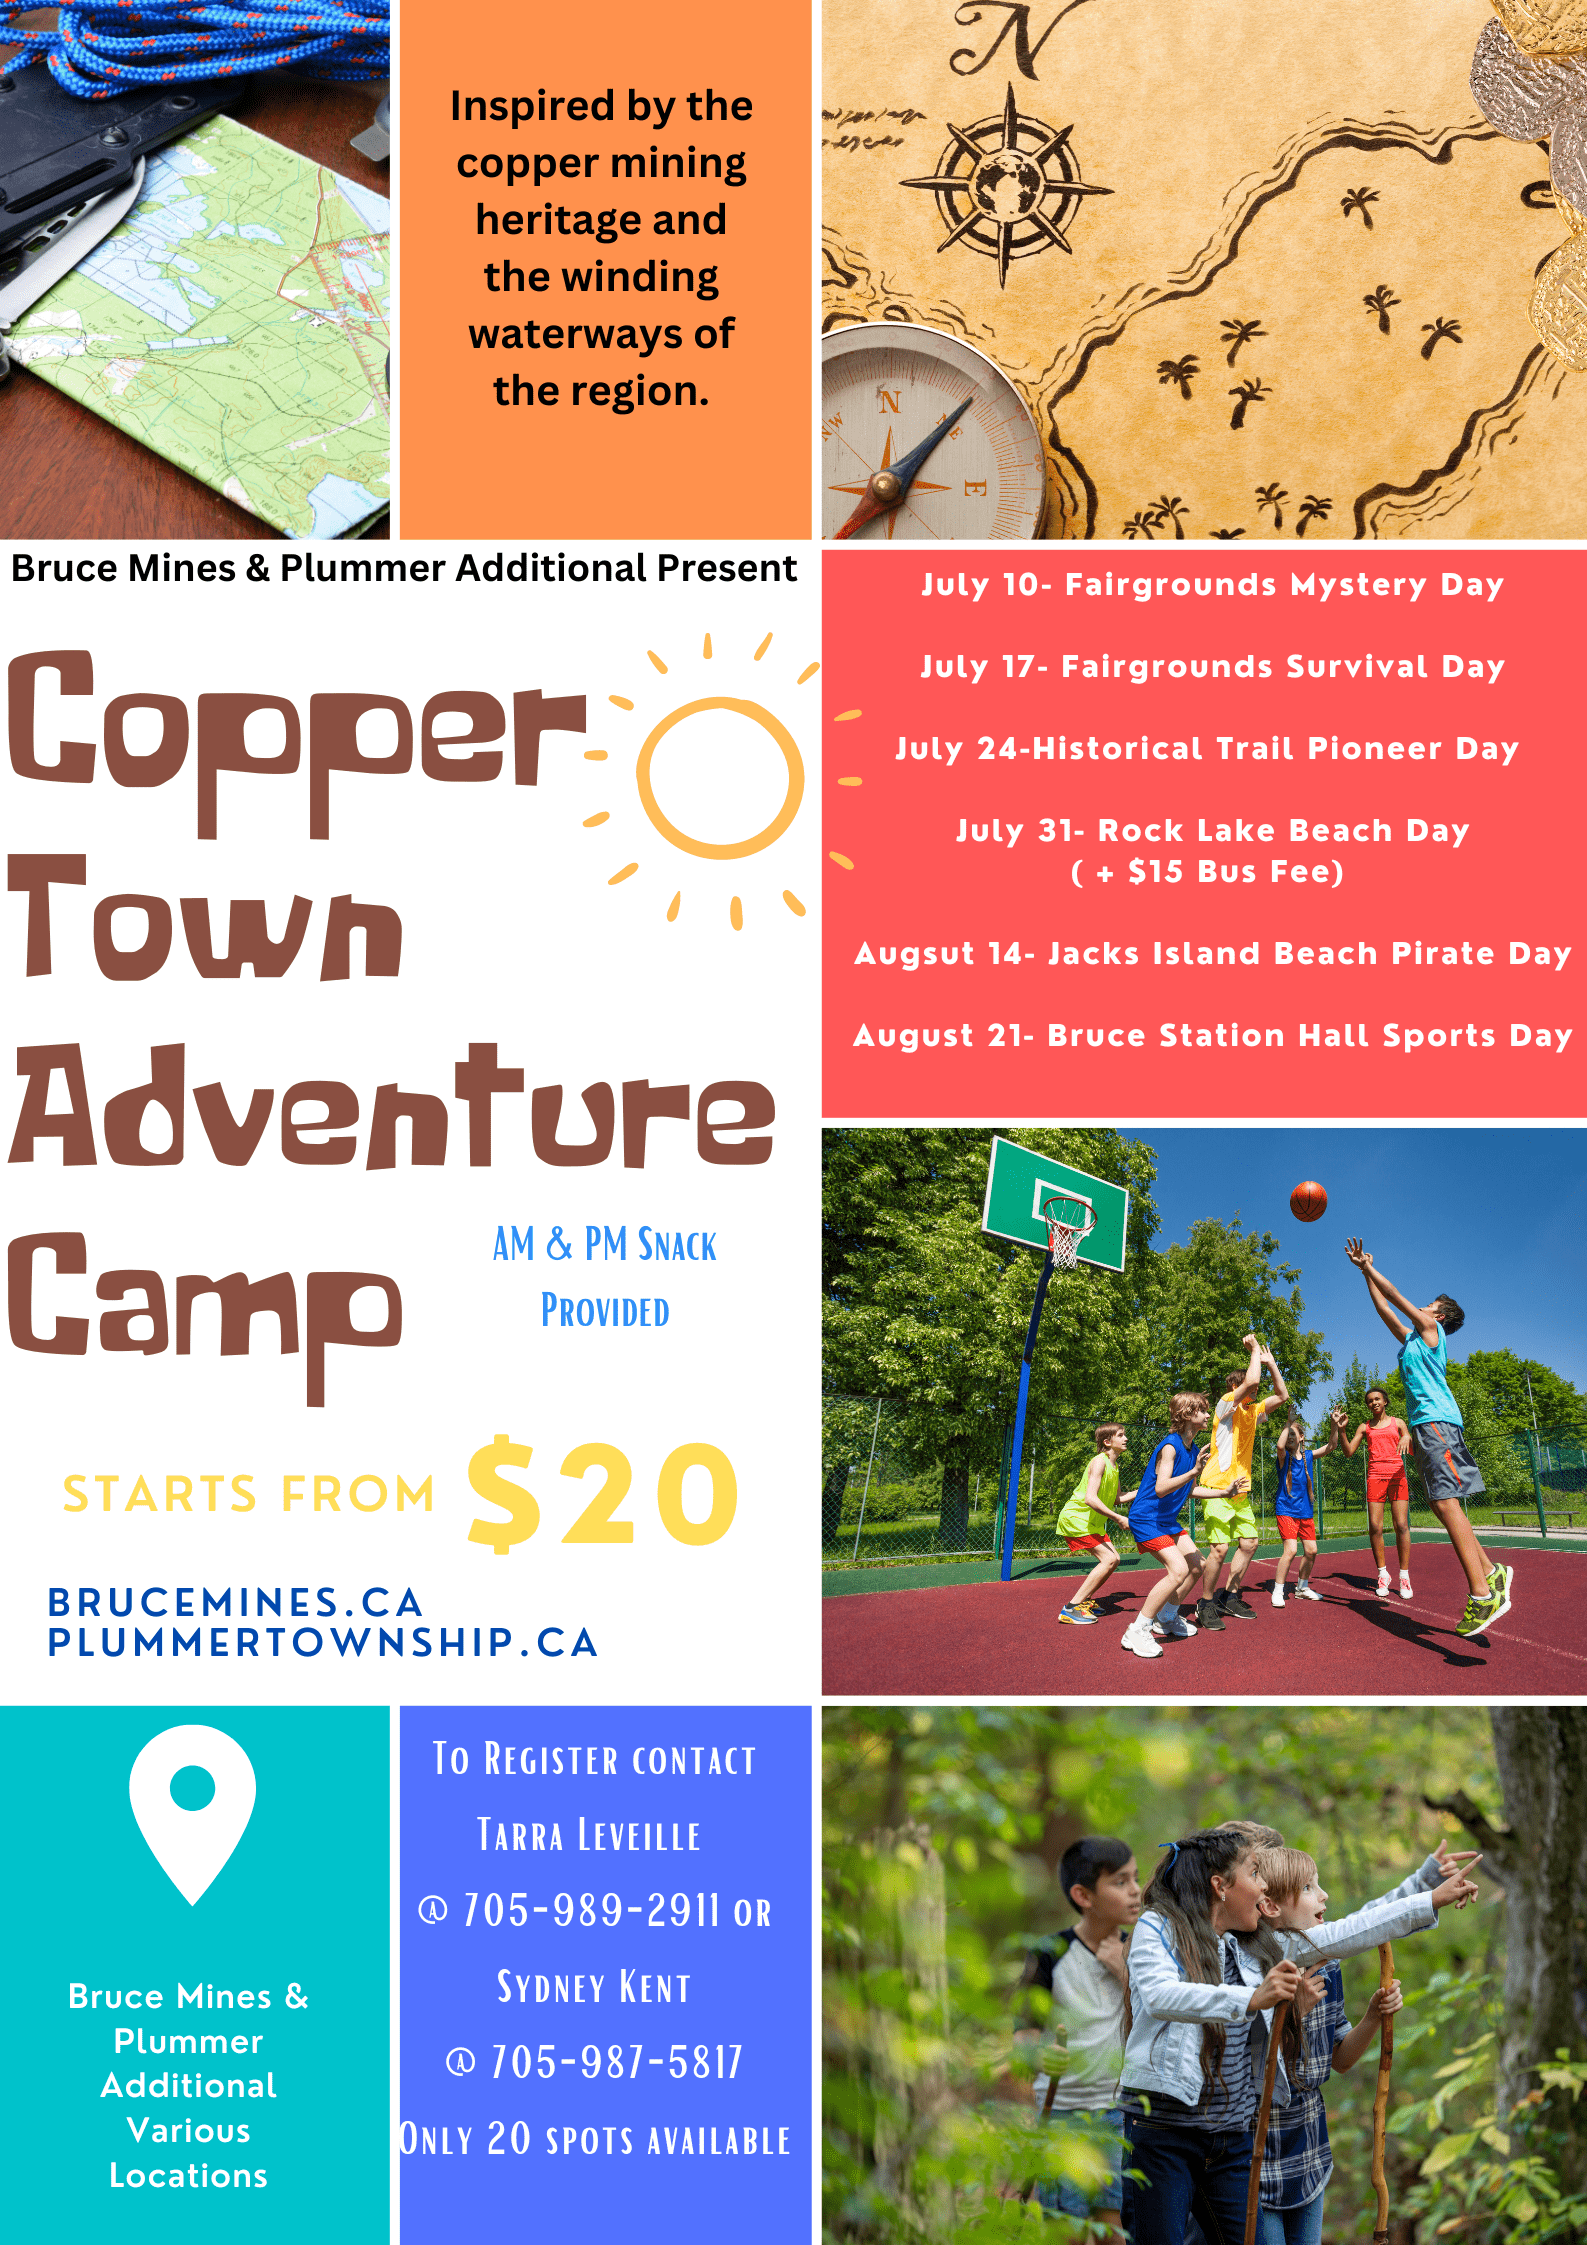 Copper Town Adventure Camp - July 31